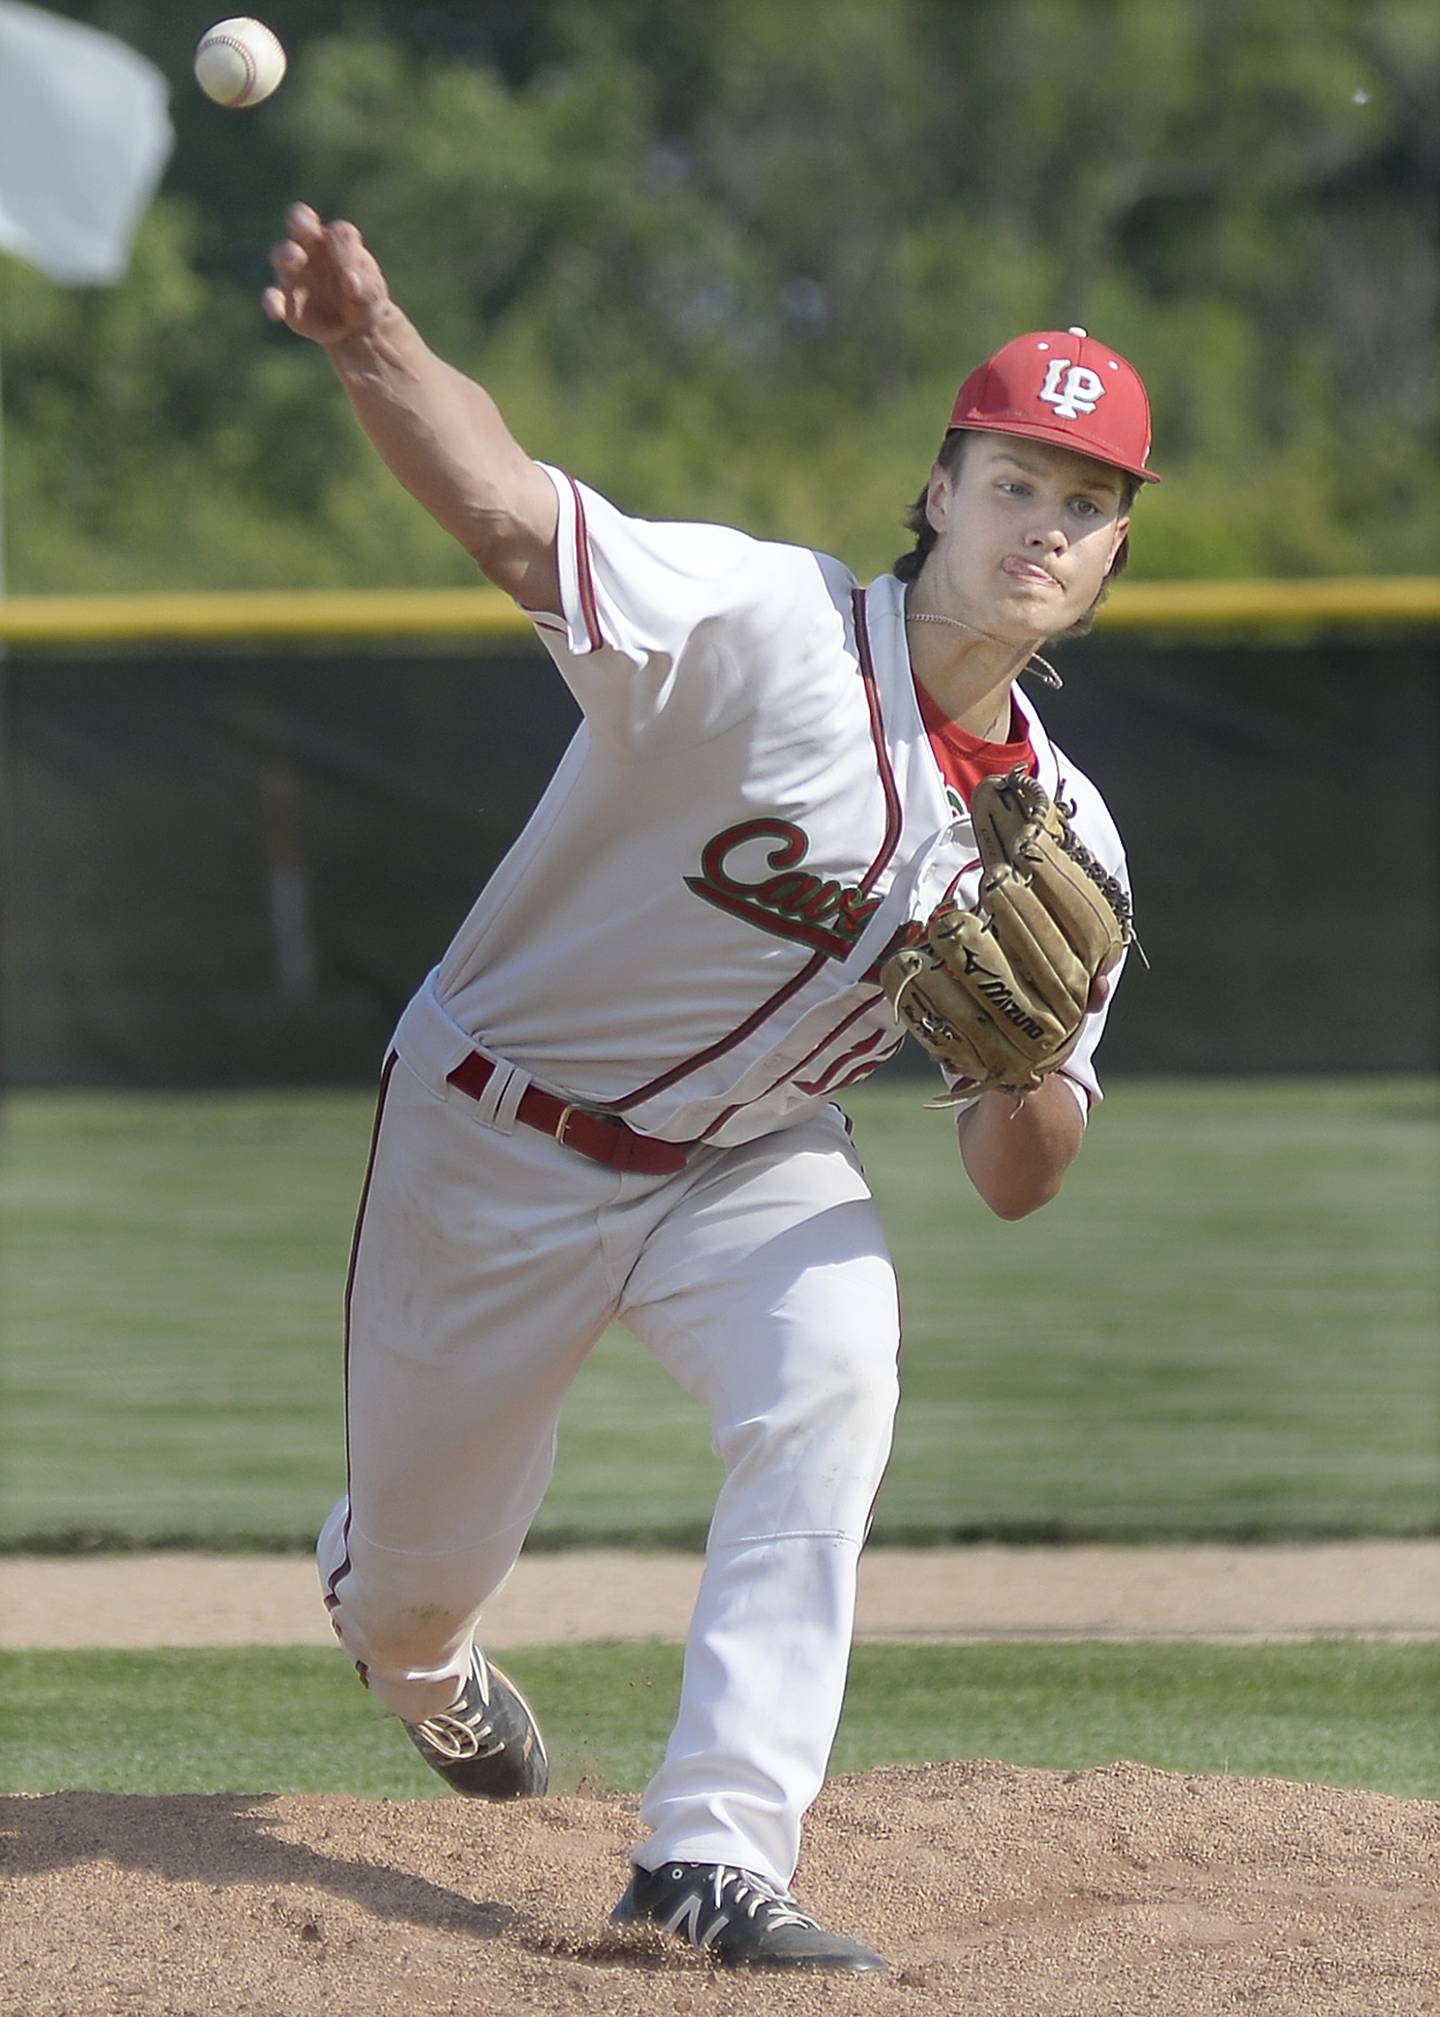 La Salle-Peru starting pitcher Brendan Boudreau fires a pitch against Kankakee  on Monday, May 22, 2023 in Oglesby.